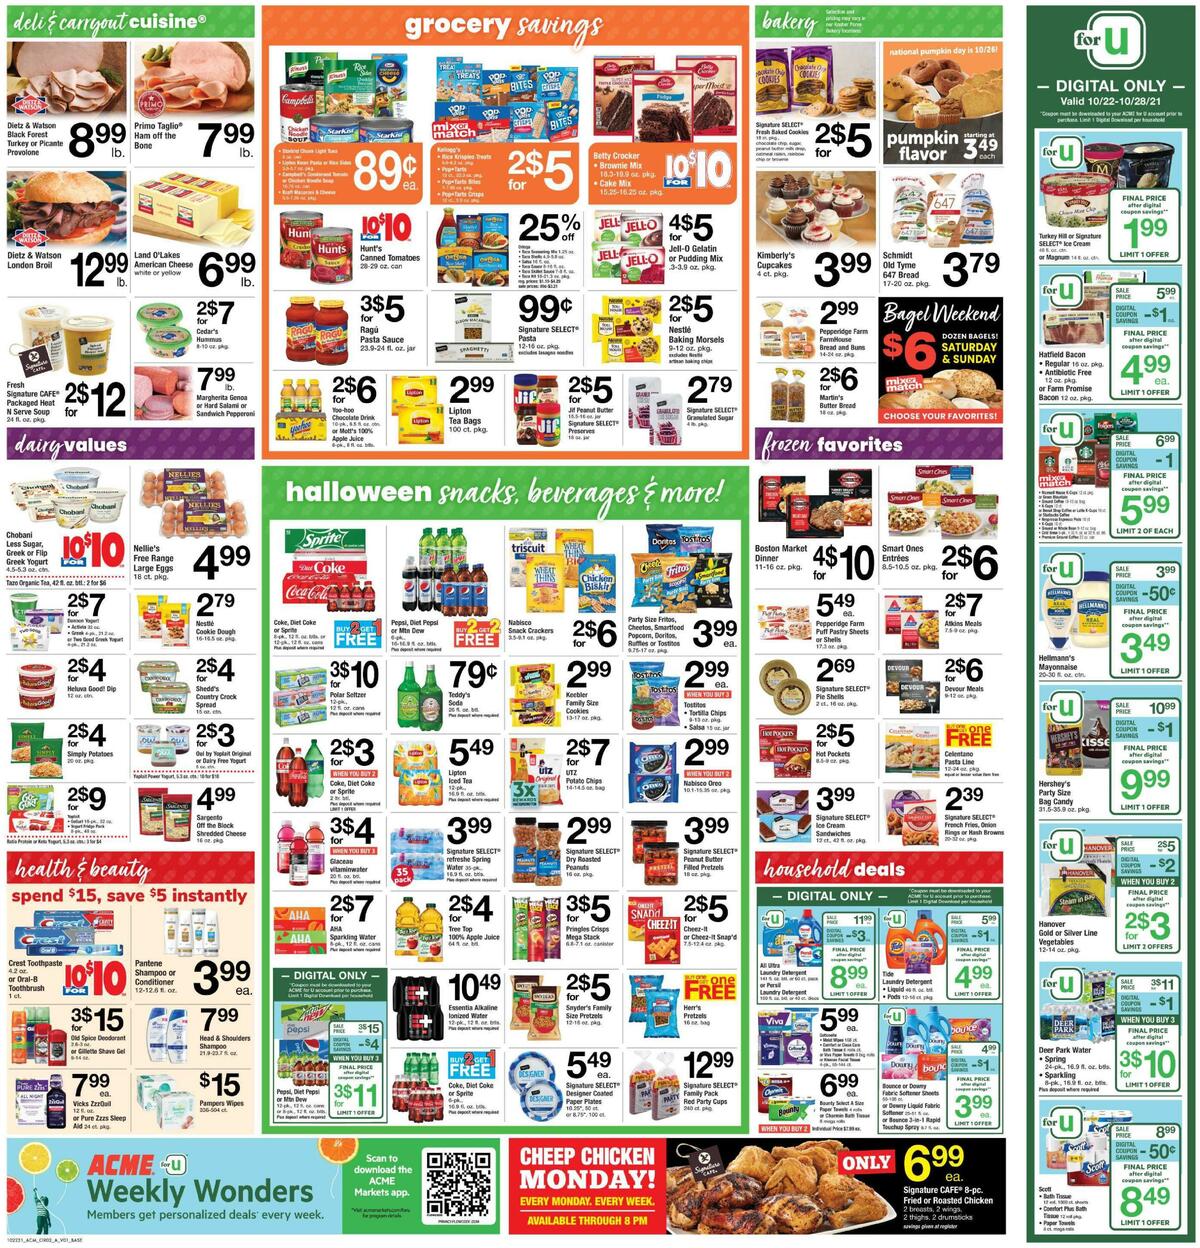 ACME Markets Weekly Ad from October 22